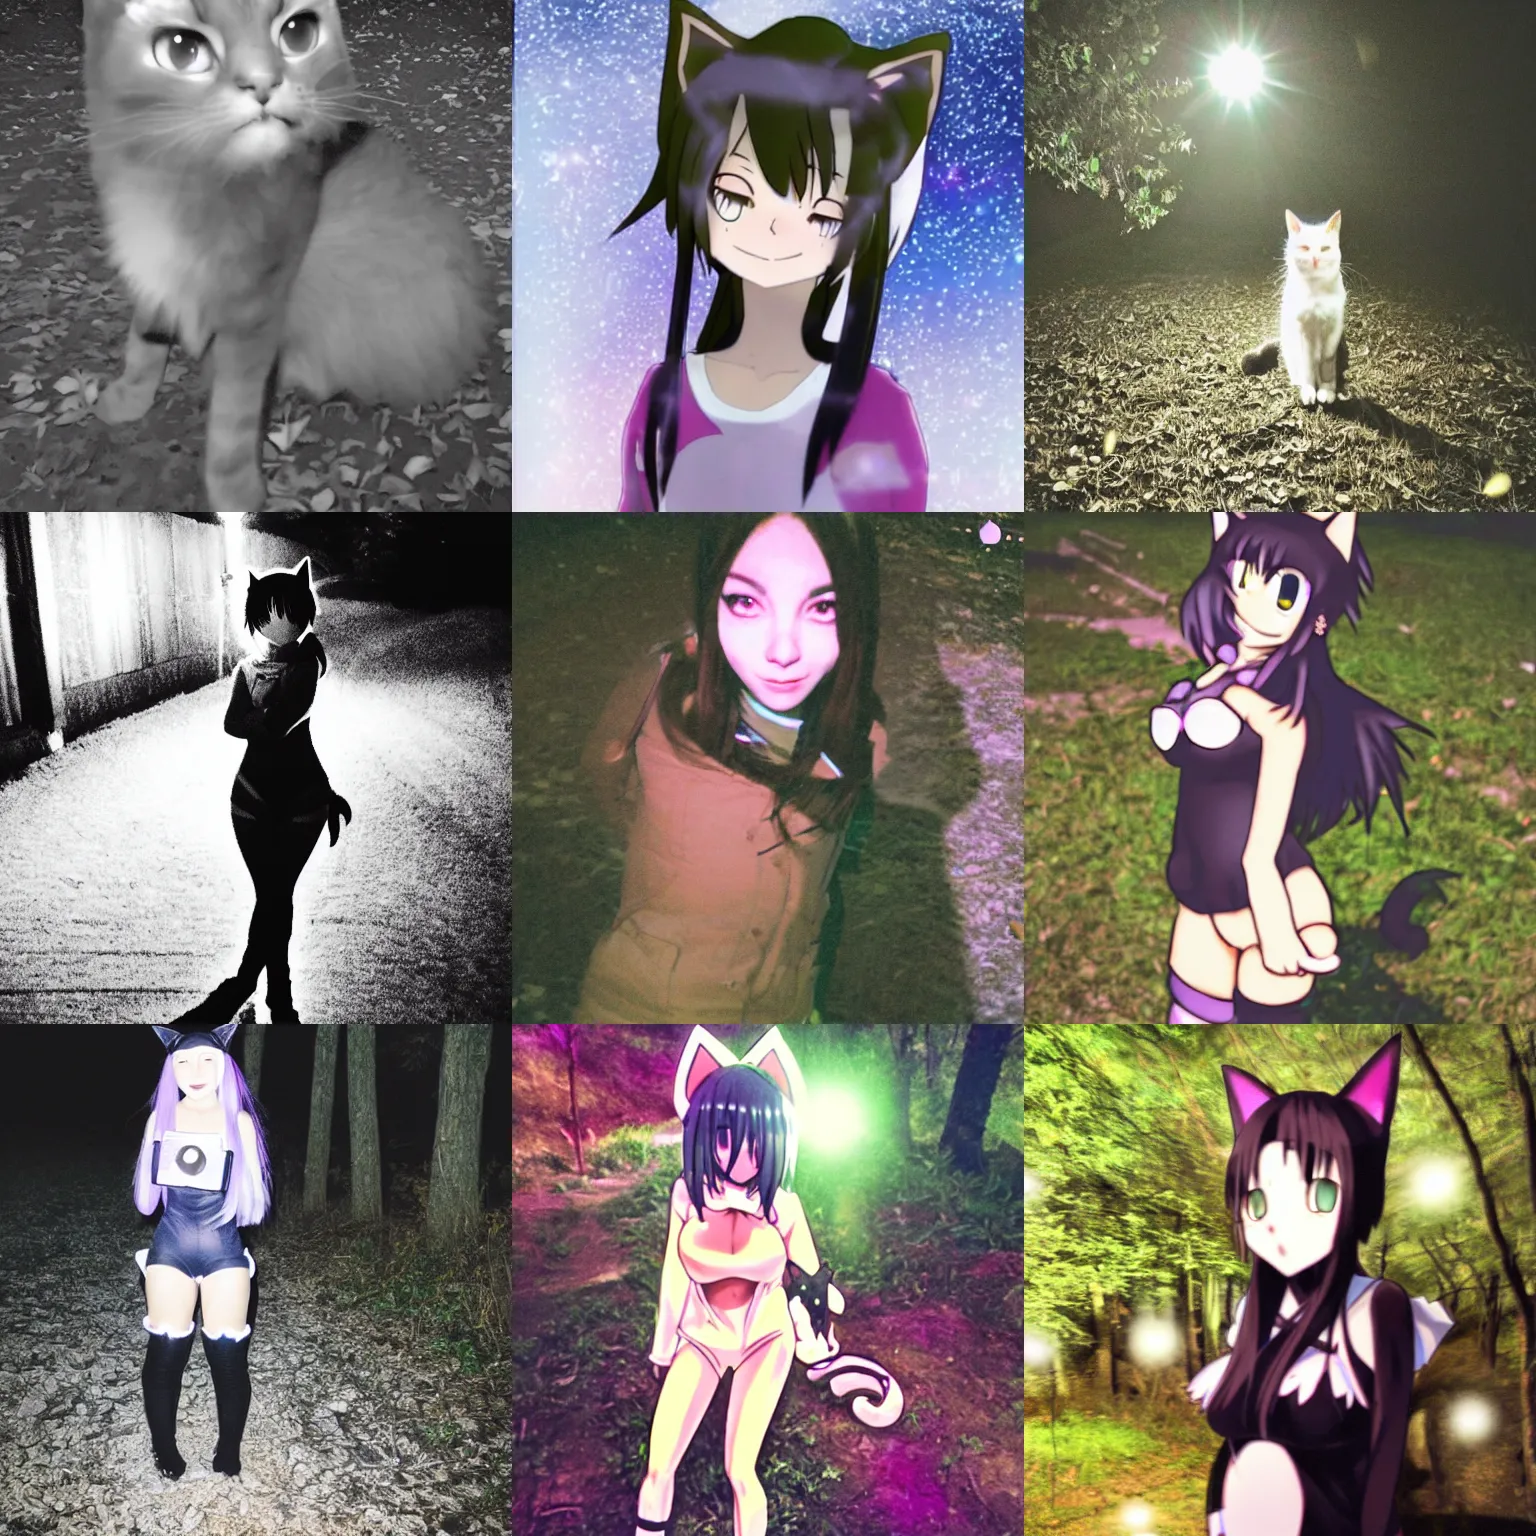 anime catgirl caught on a midnight trail cam